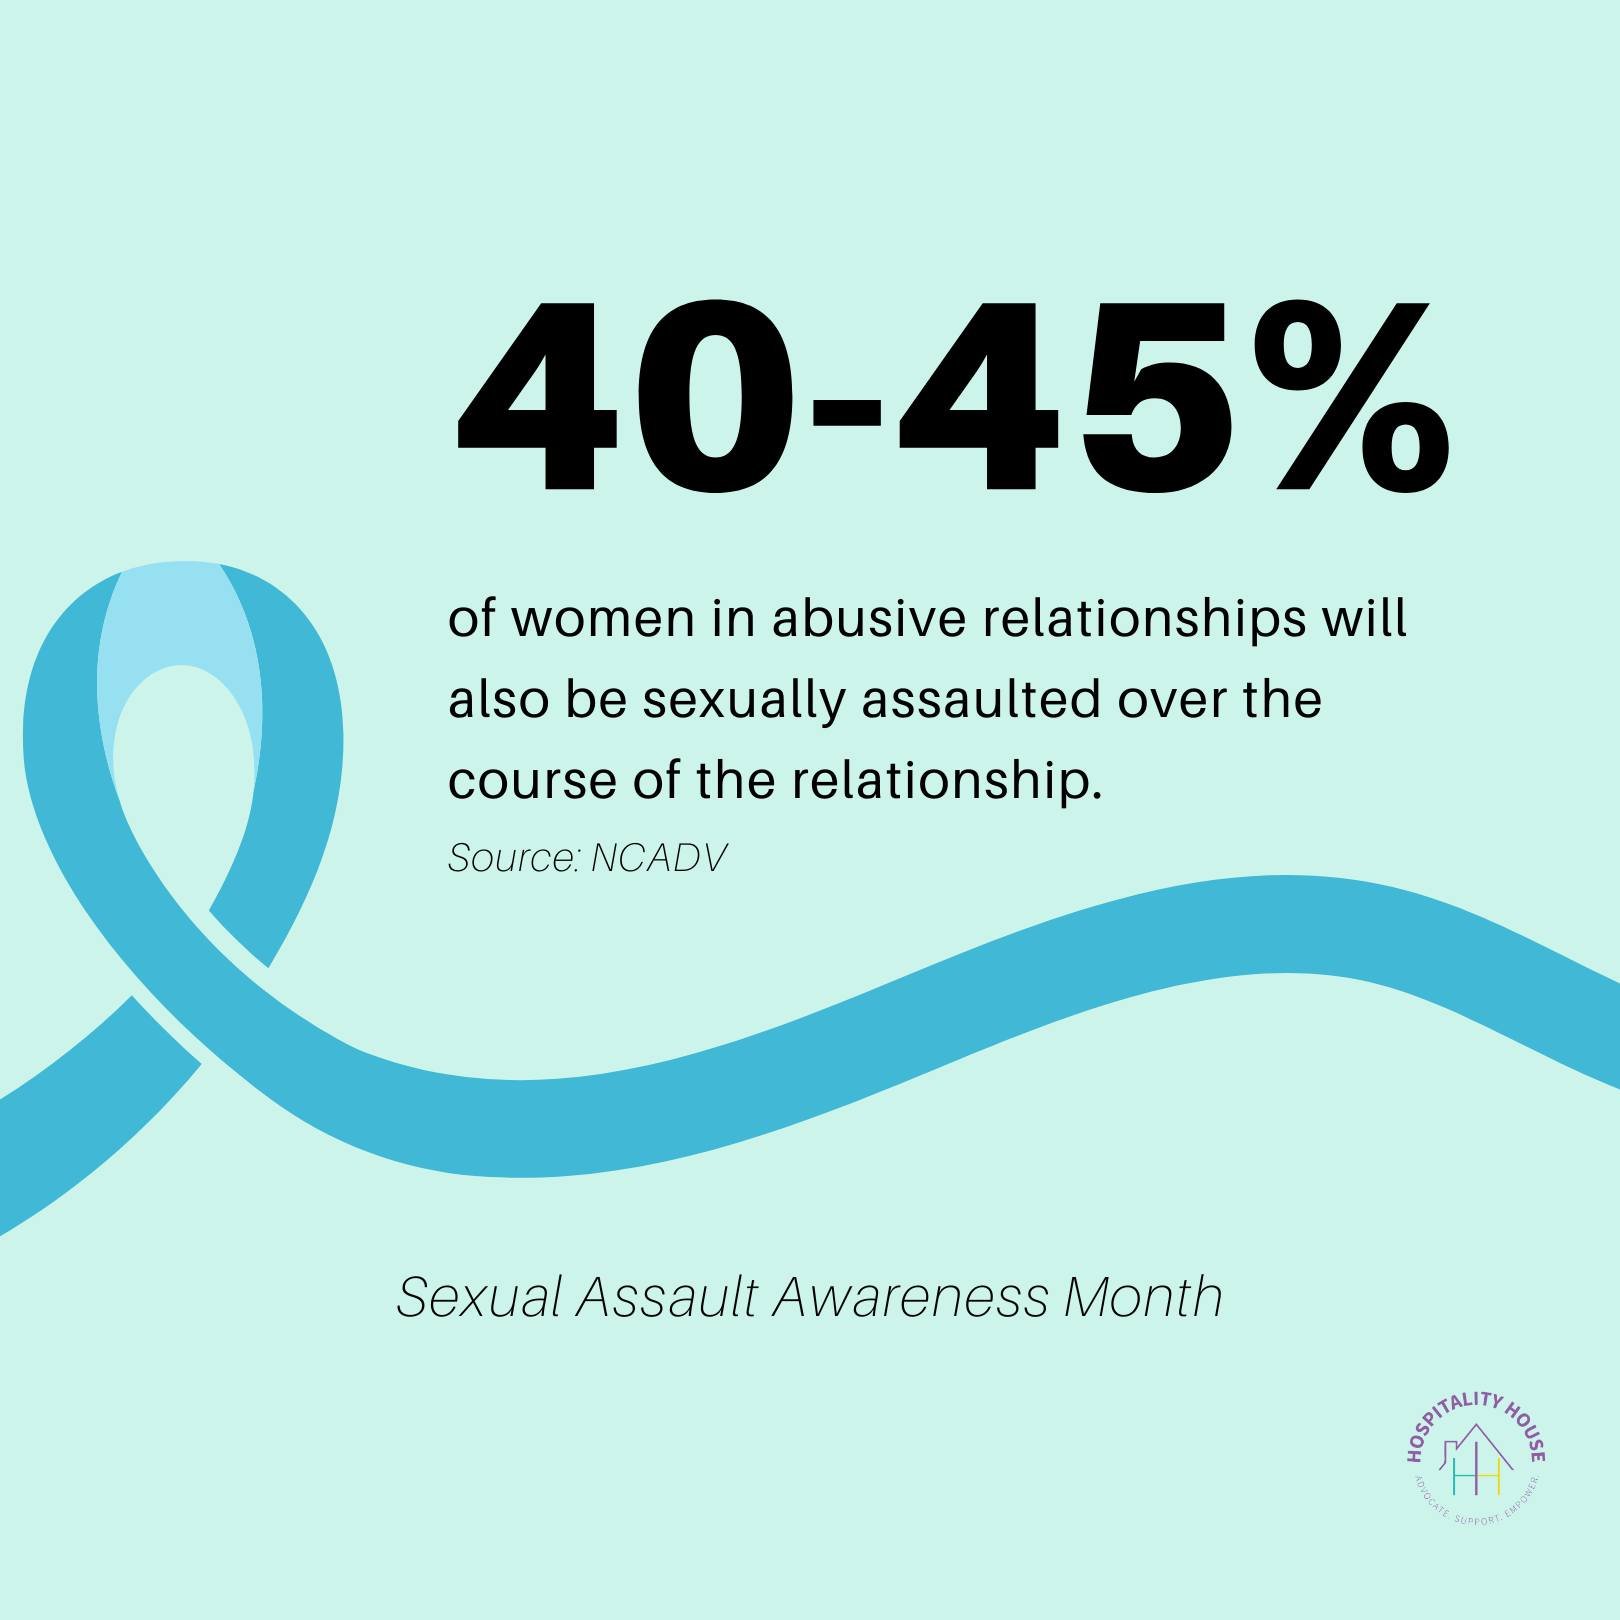 Victims of domestic violence often also experience sexual assault. In partnership with the Sexual Assault Center, we're working to end the cycle of intimate partner violence and co-occuring forms of victimization in our community.

If you or someone 